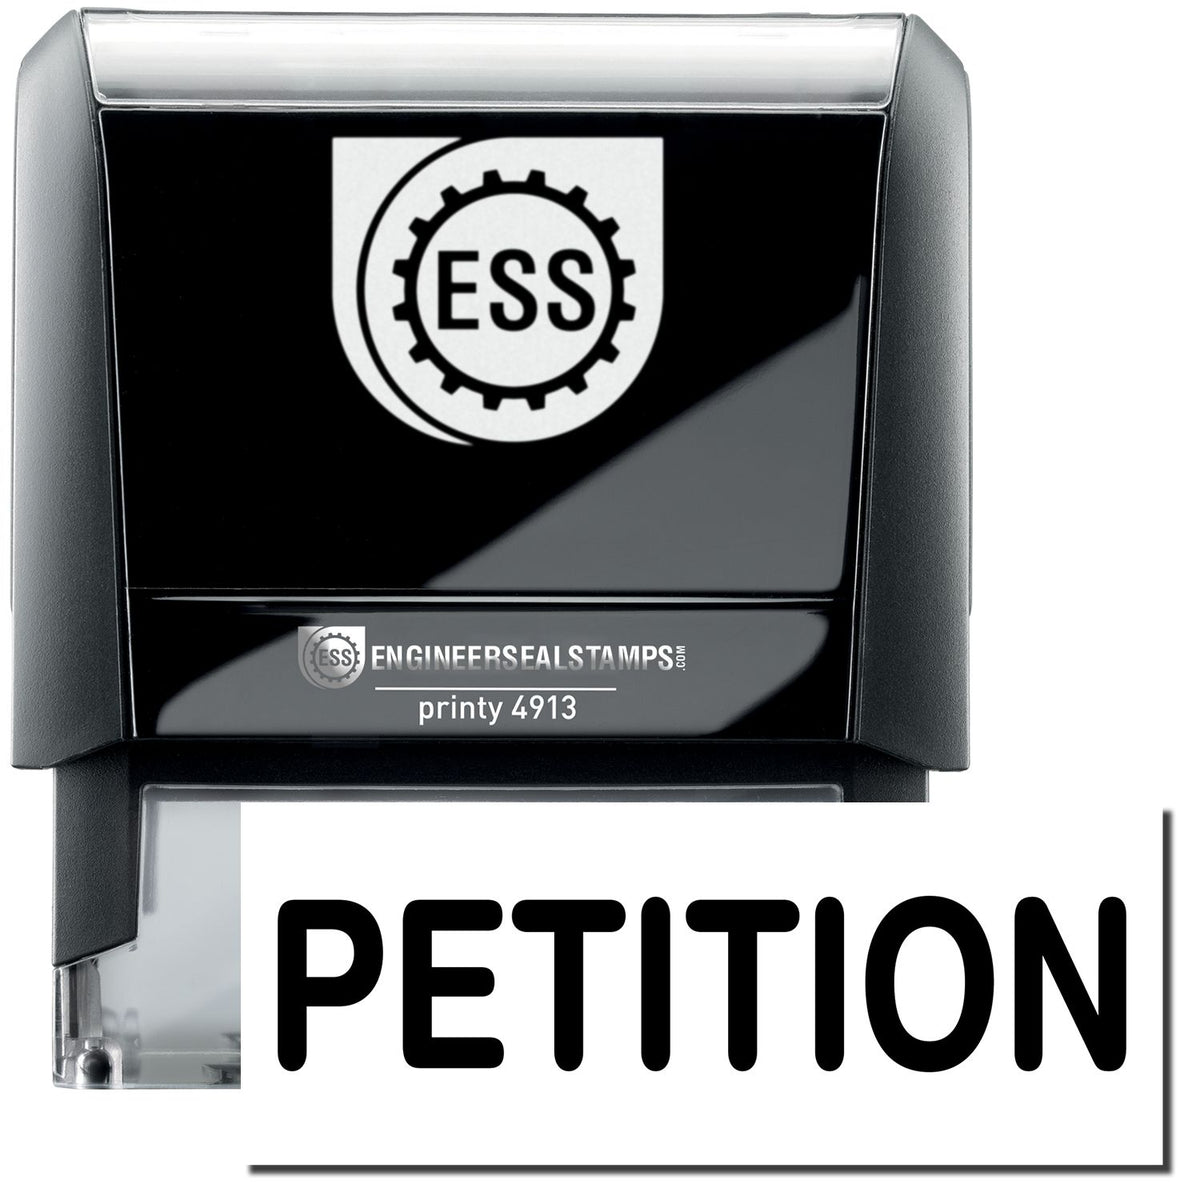 A self-inking stamp with a stamped image showing how the text &quot;PETITION&quot; in a large bold font is displayed by it.